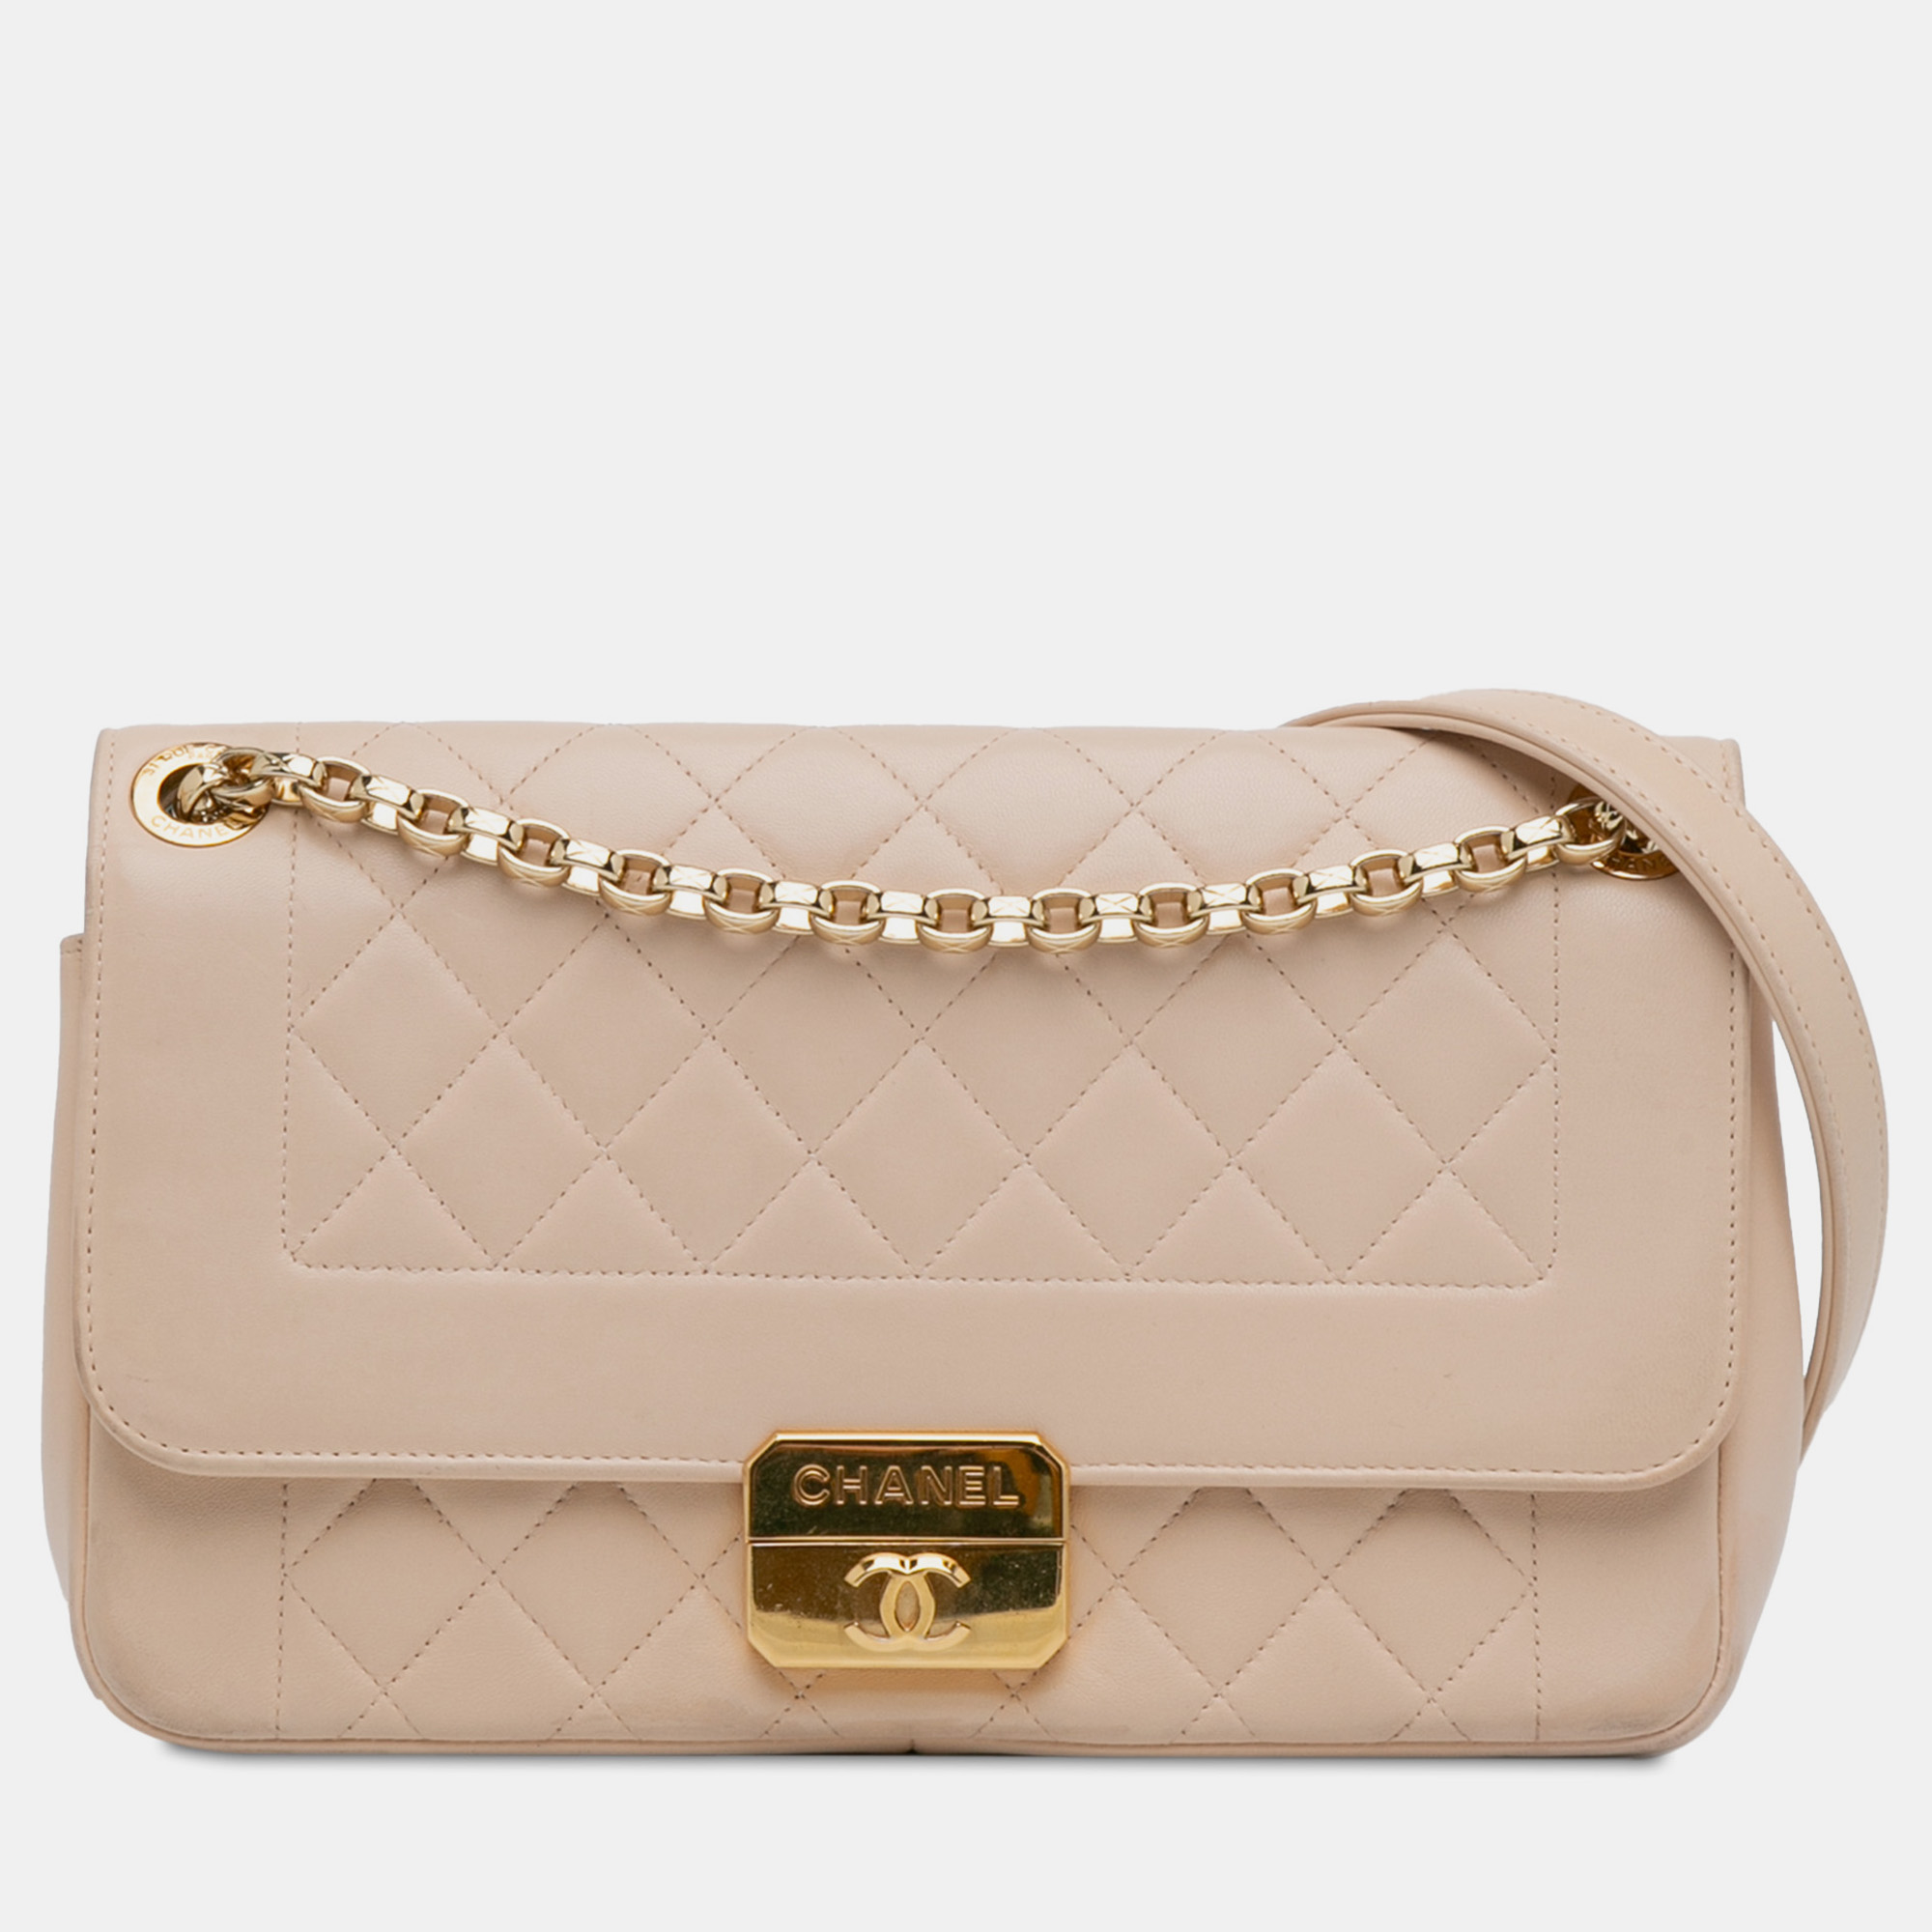 Chanel large lambskin chic with me flap